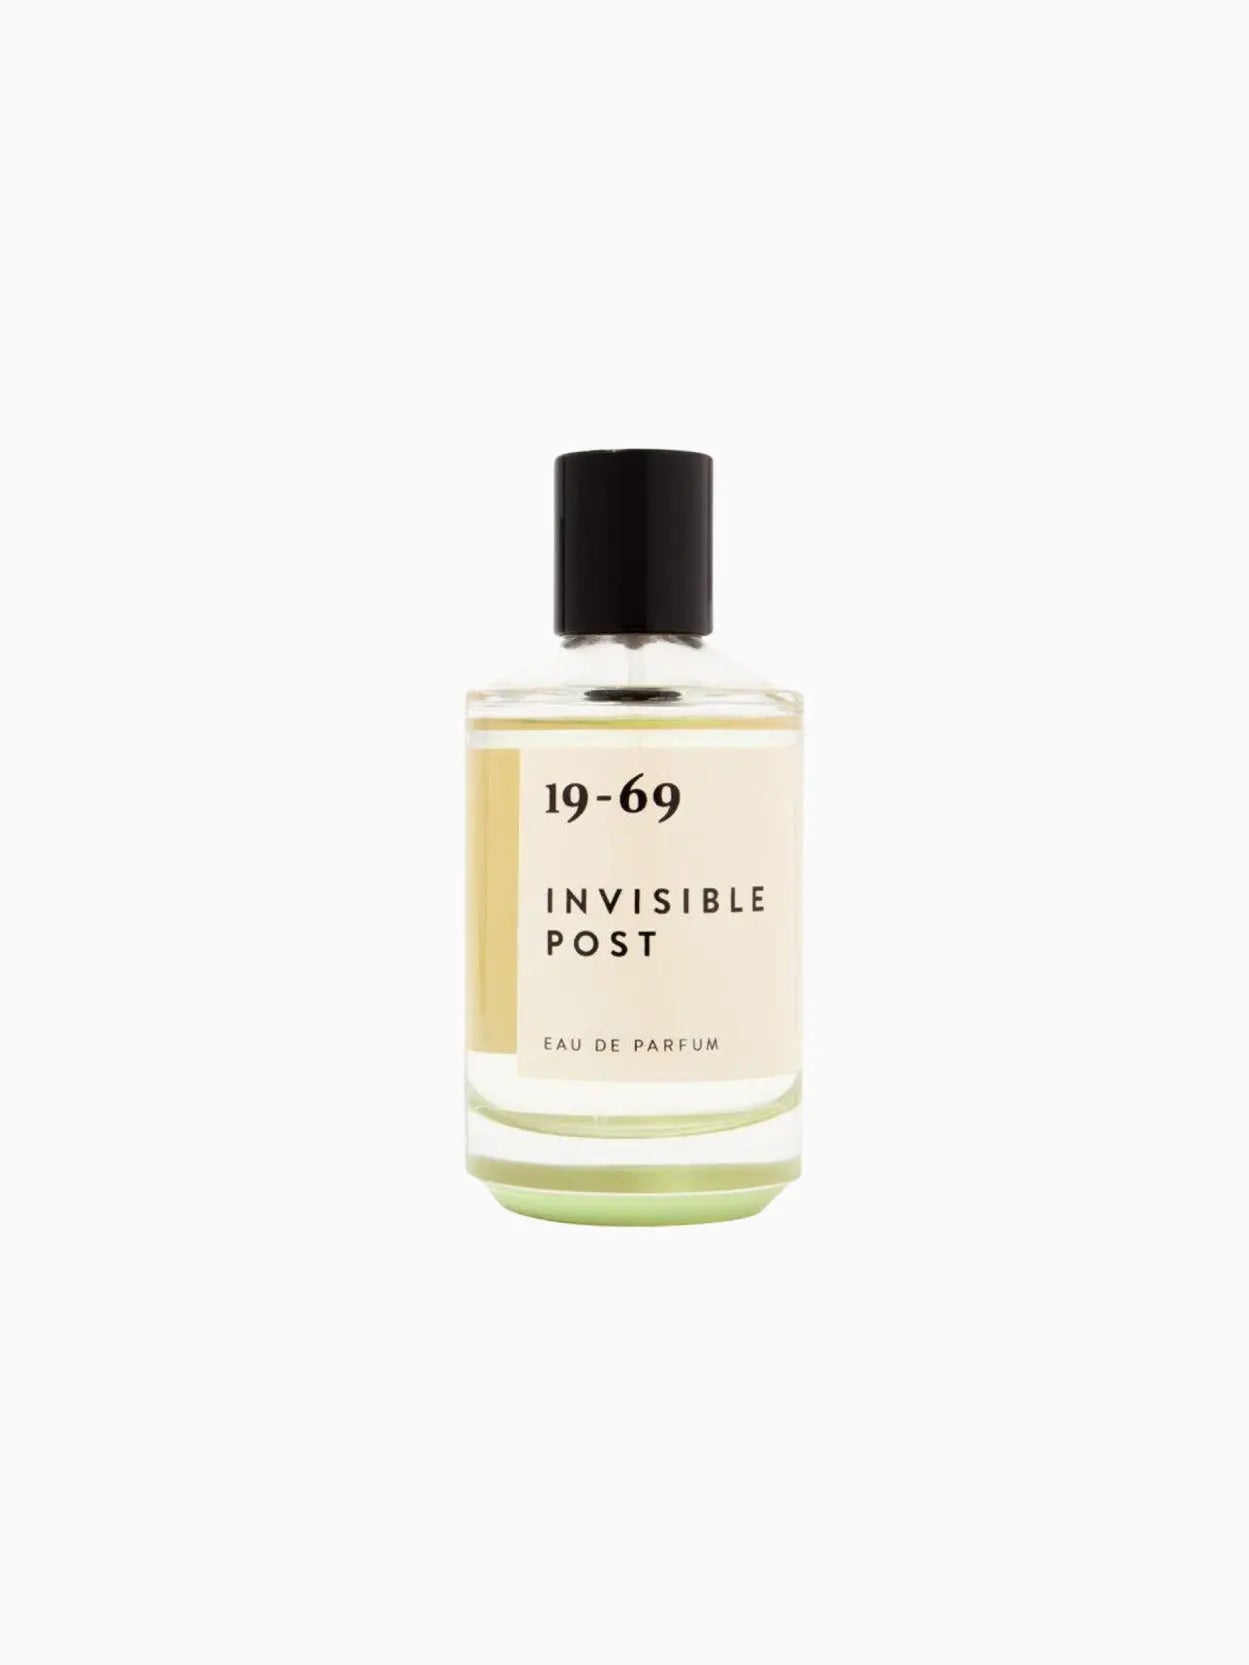 A bottle of 19-69 Invisible Post 100ml available at Bassalstore in Barcelona. The bottle has a clear body with a light green liquid inside, a black cap, and minimalist text labeling on the front.